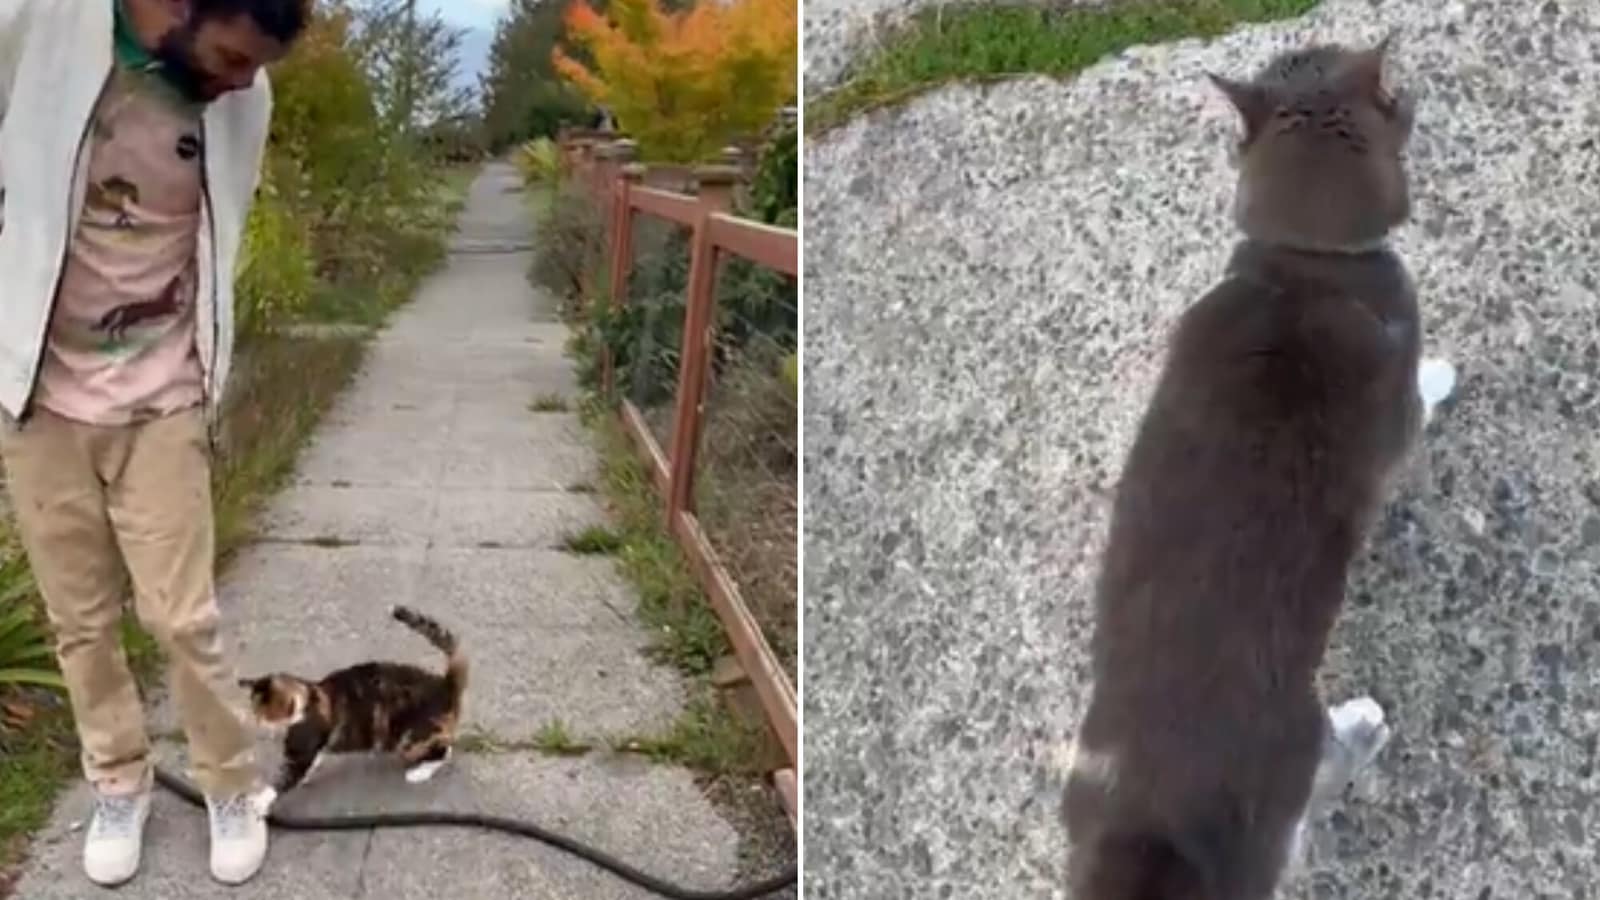 Man asks cat if he can pet it, kitty brutally rejects him. Watch